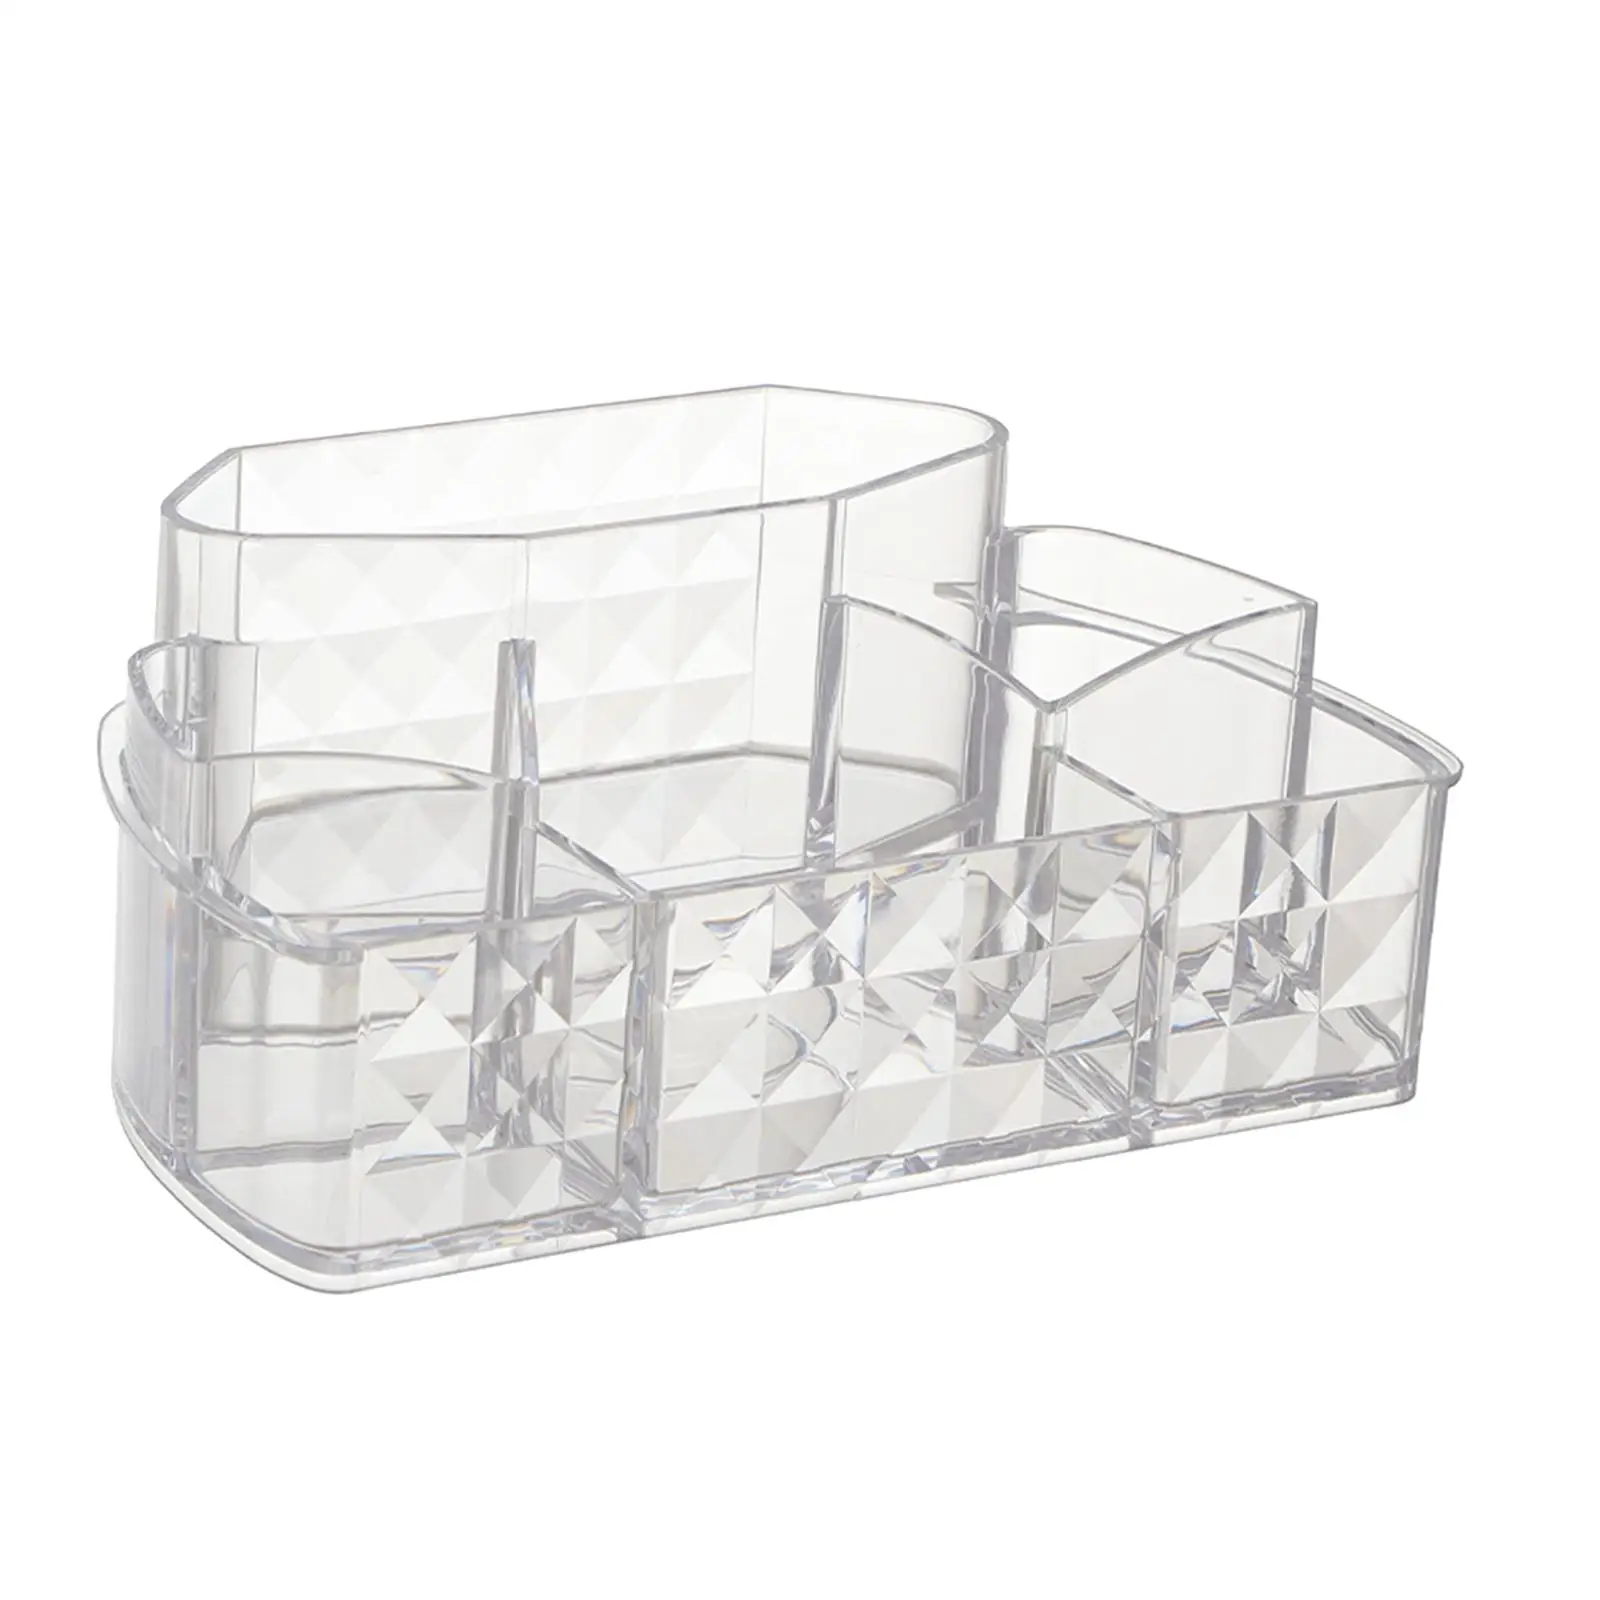 Makeup Organizer Transparent Compact Holder Cosmetic Storage Box for Lipstick Jewelry Brushes Eyeshadow Palettes Desk